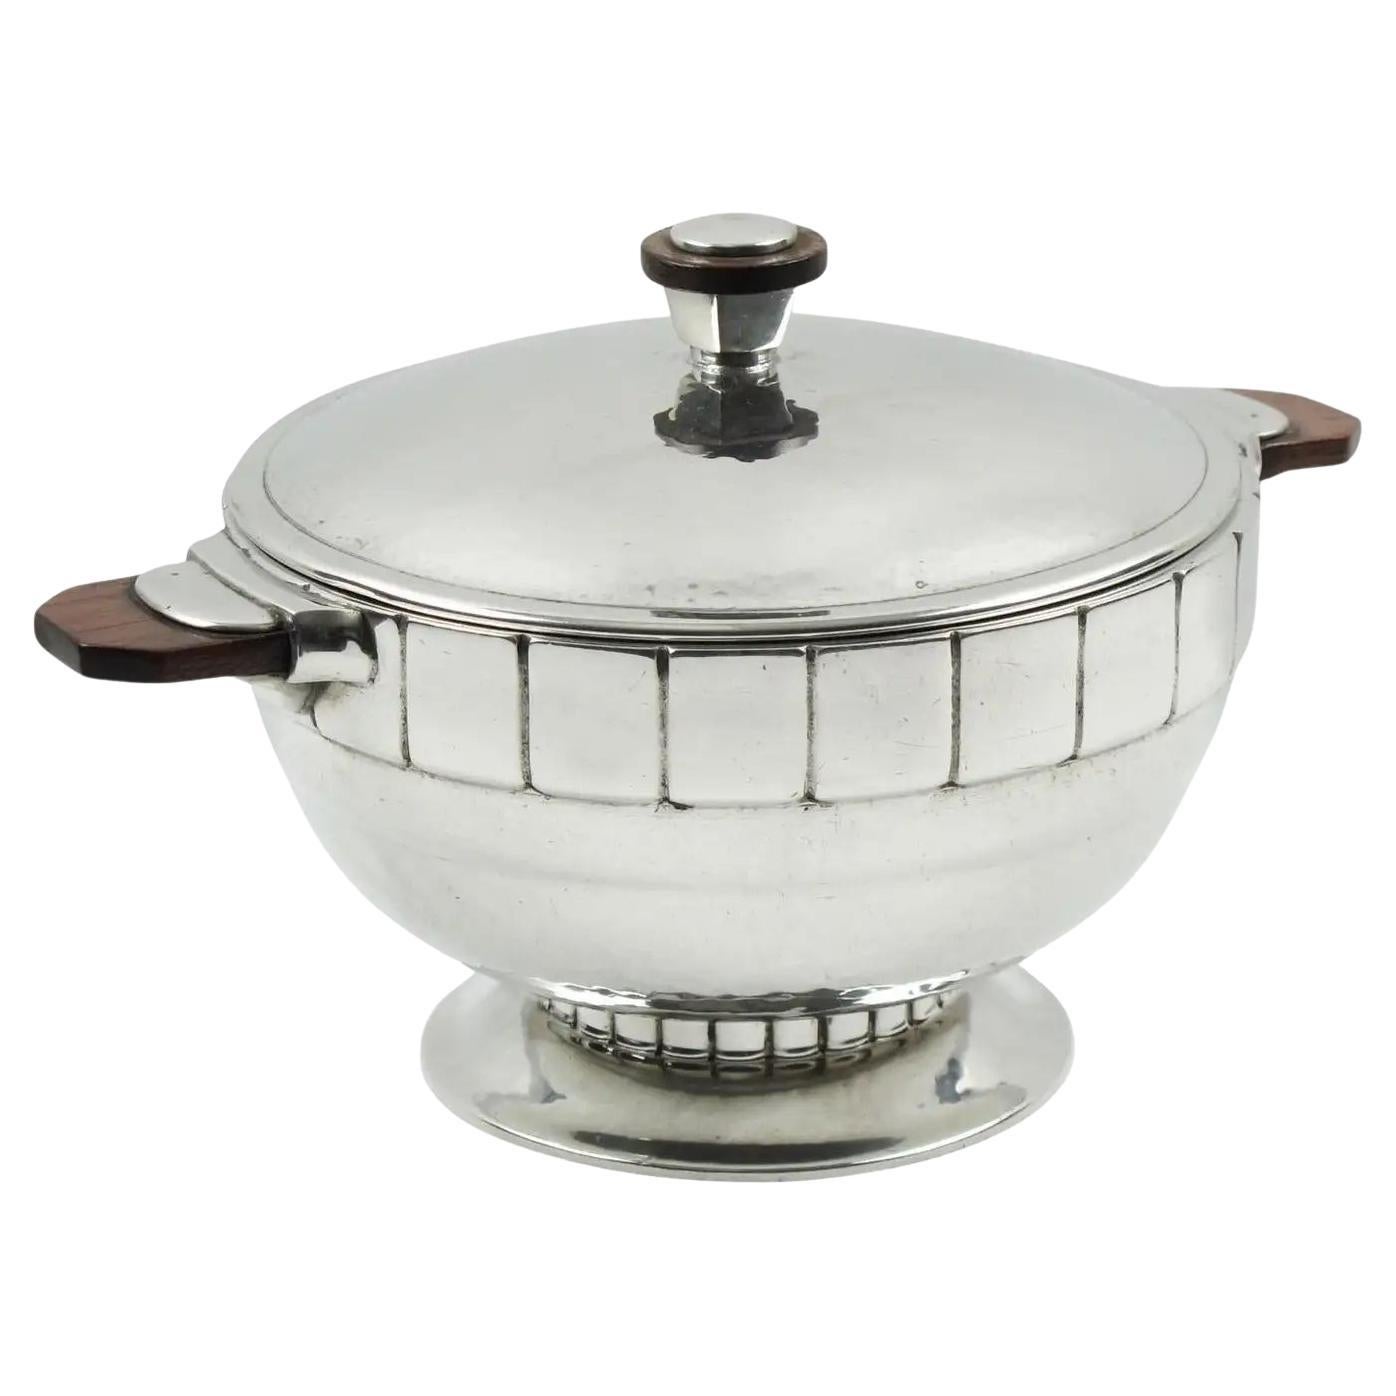 Art Deco Pewter Tureen Covered Dish Centerpiece by H.J. Swiss, 1940s For Sale